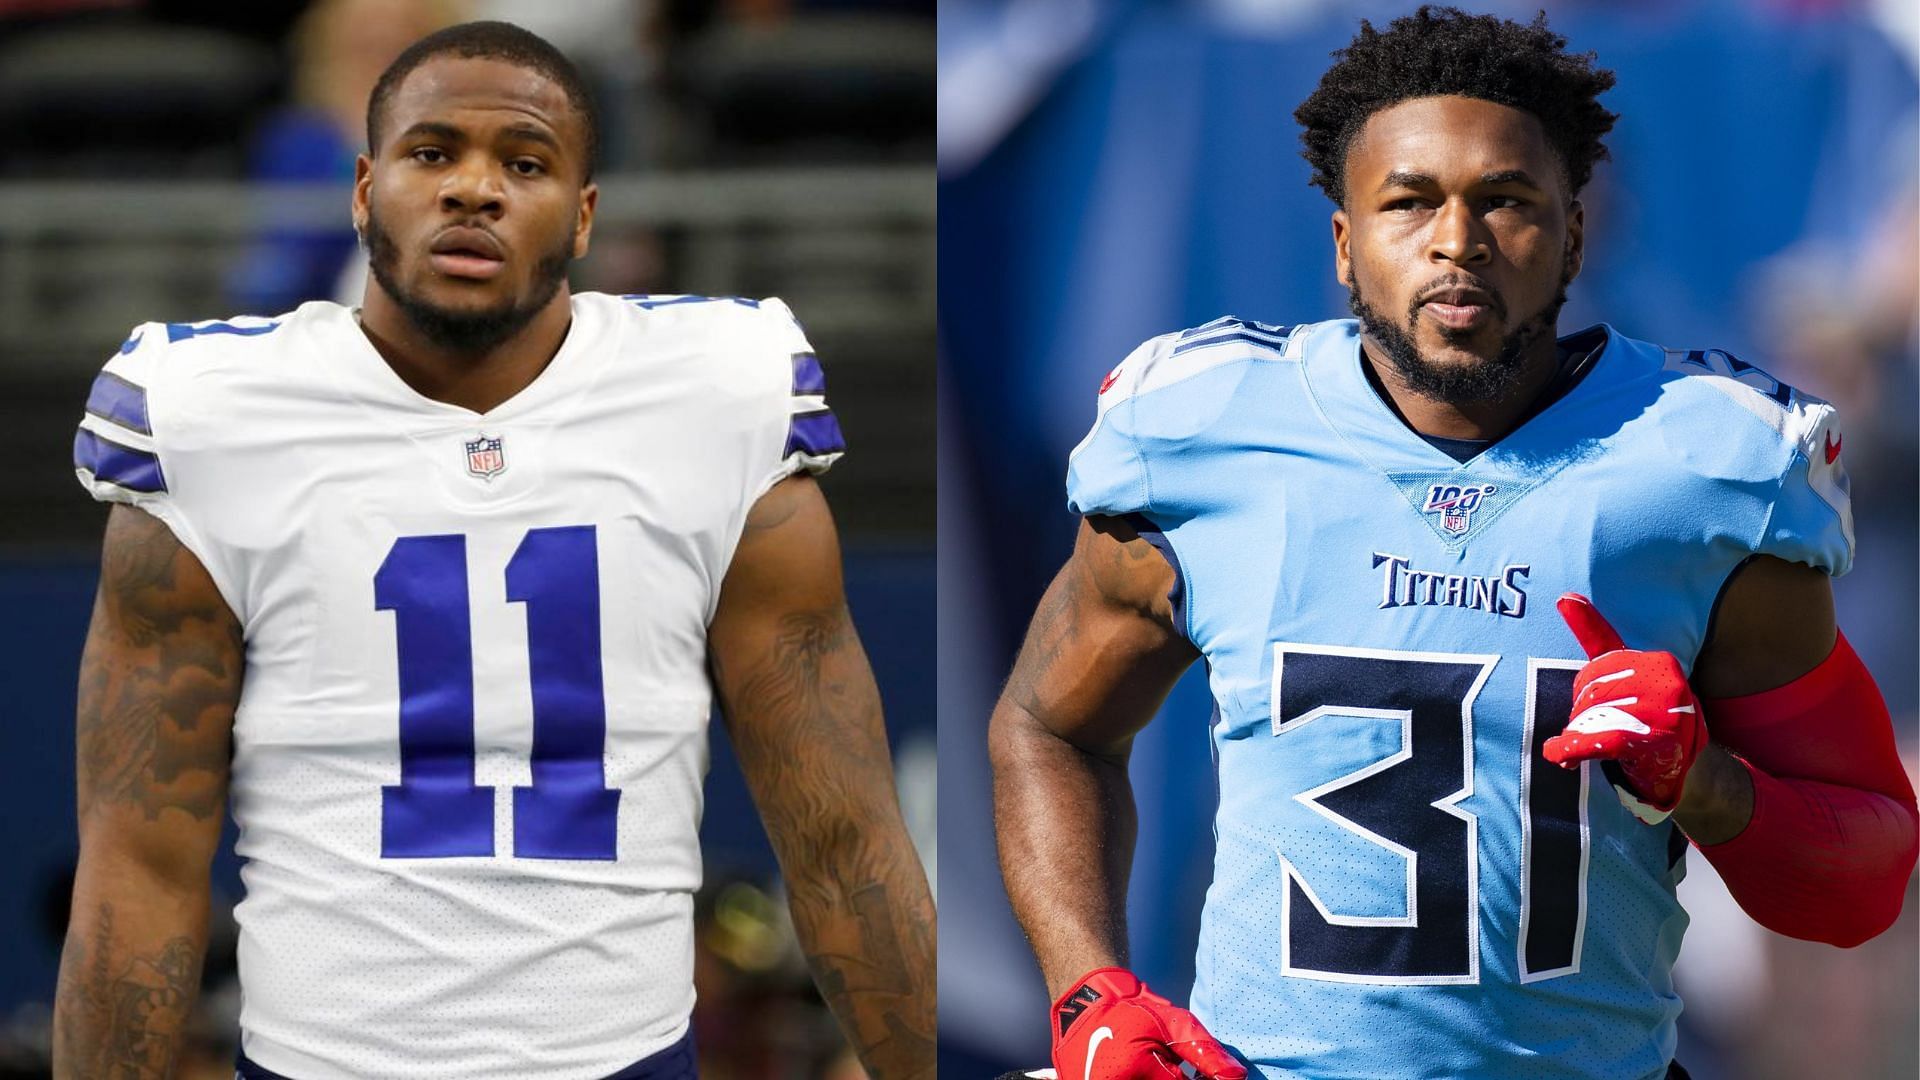  Micah Parsons raises concern on Eagles shipping picks for Kevin Byard